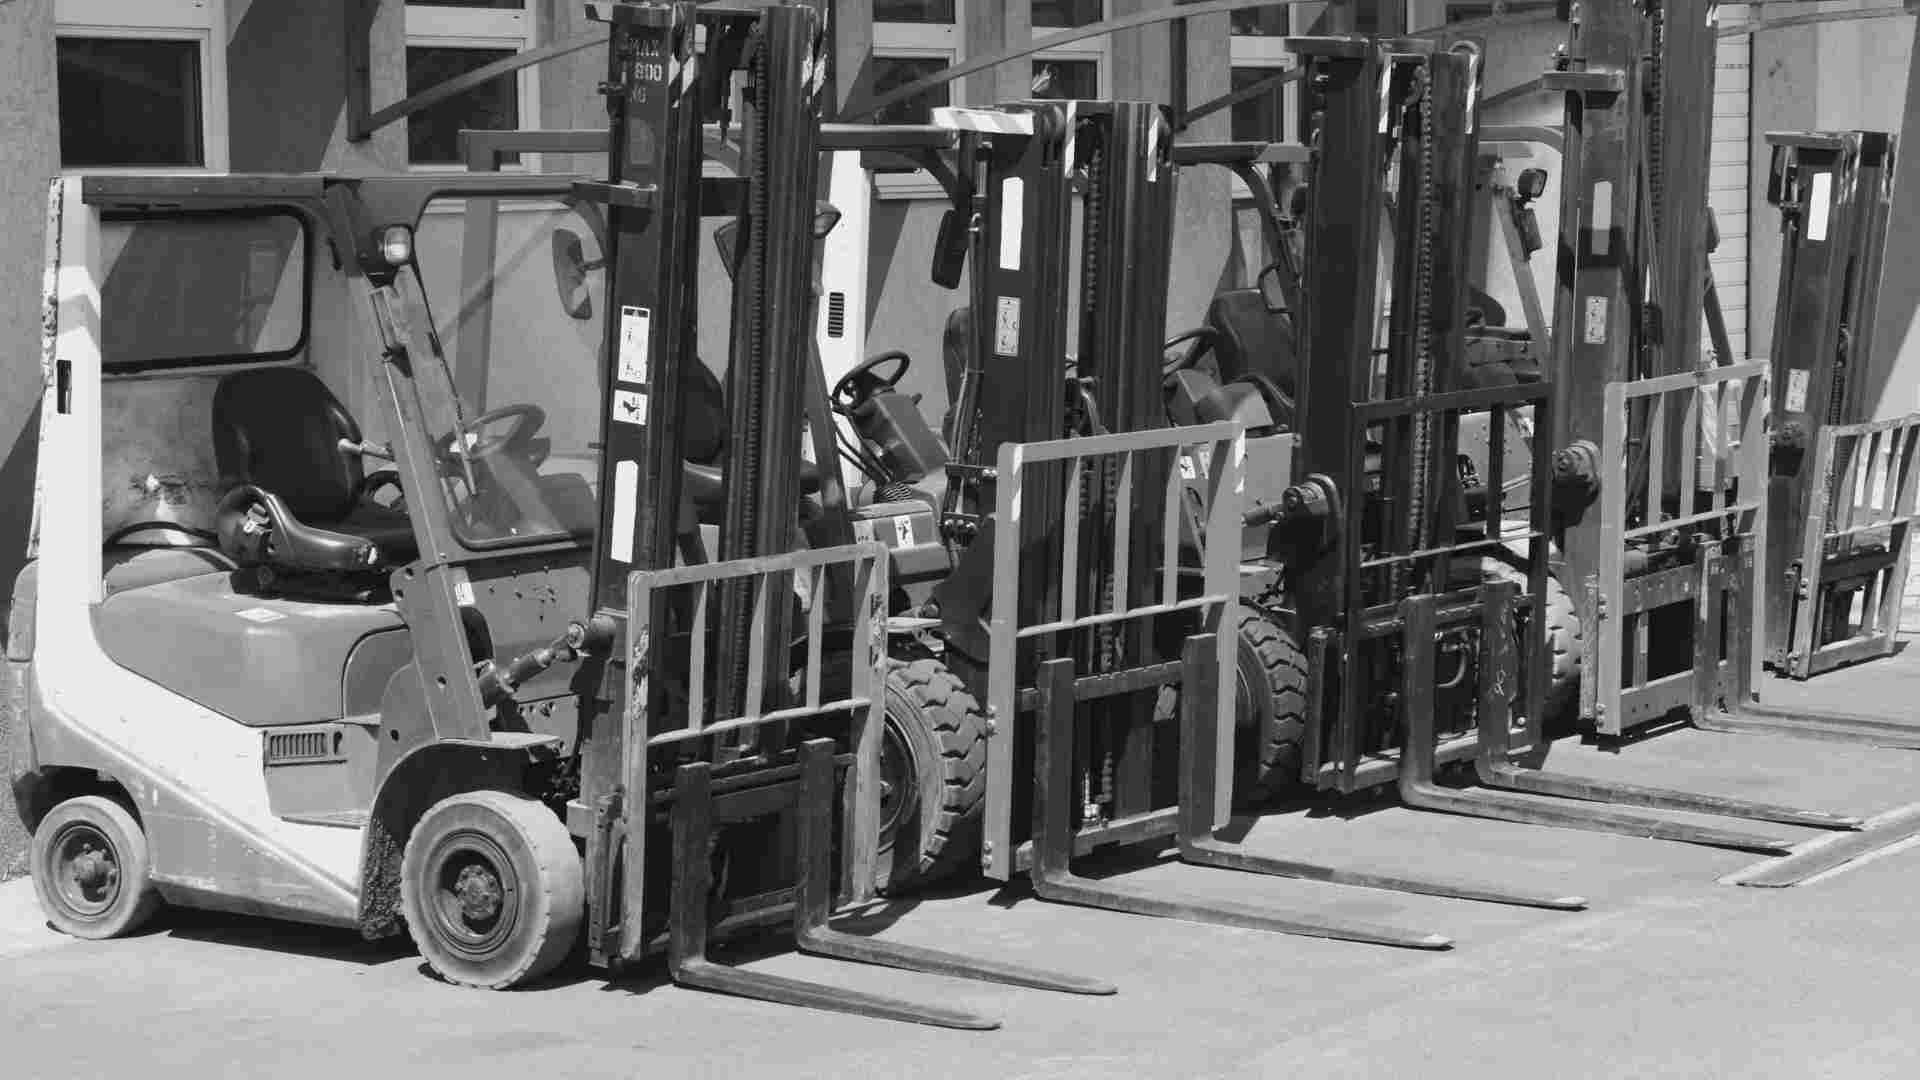 A series of forklifts lined up in a work yard